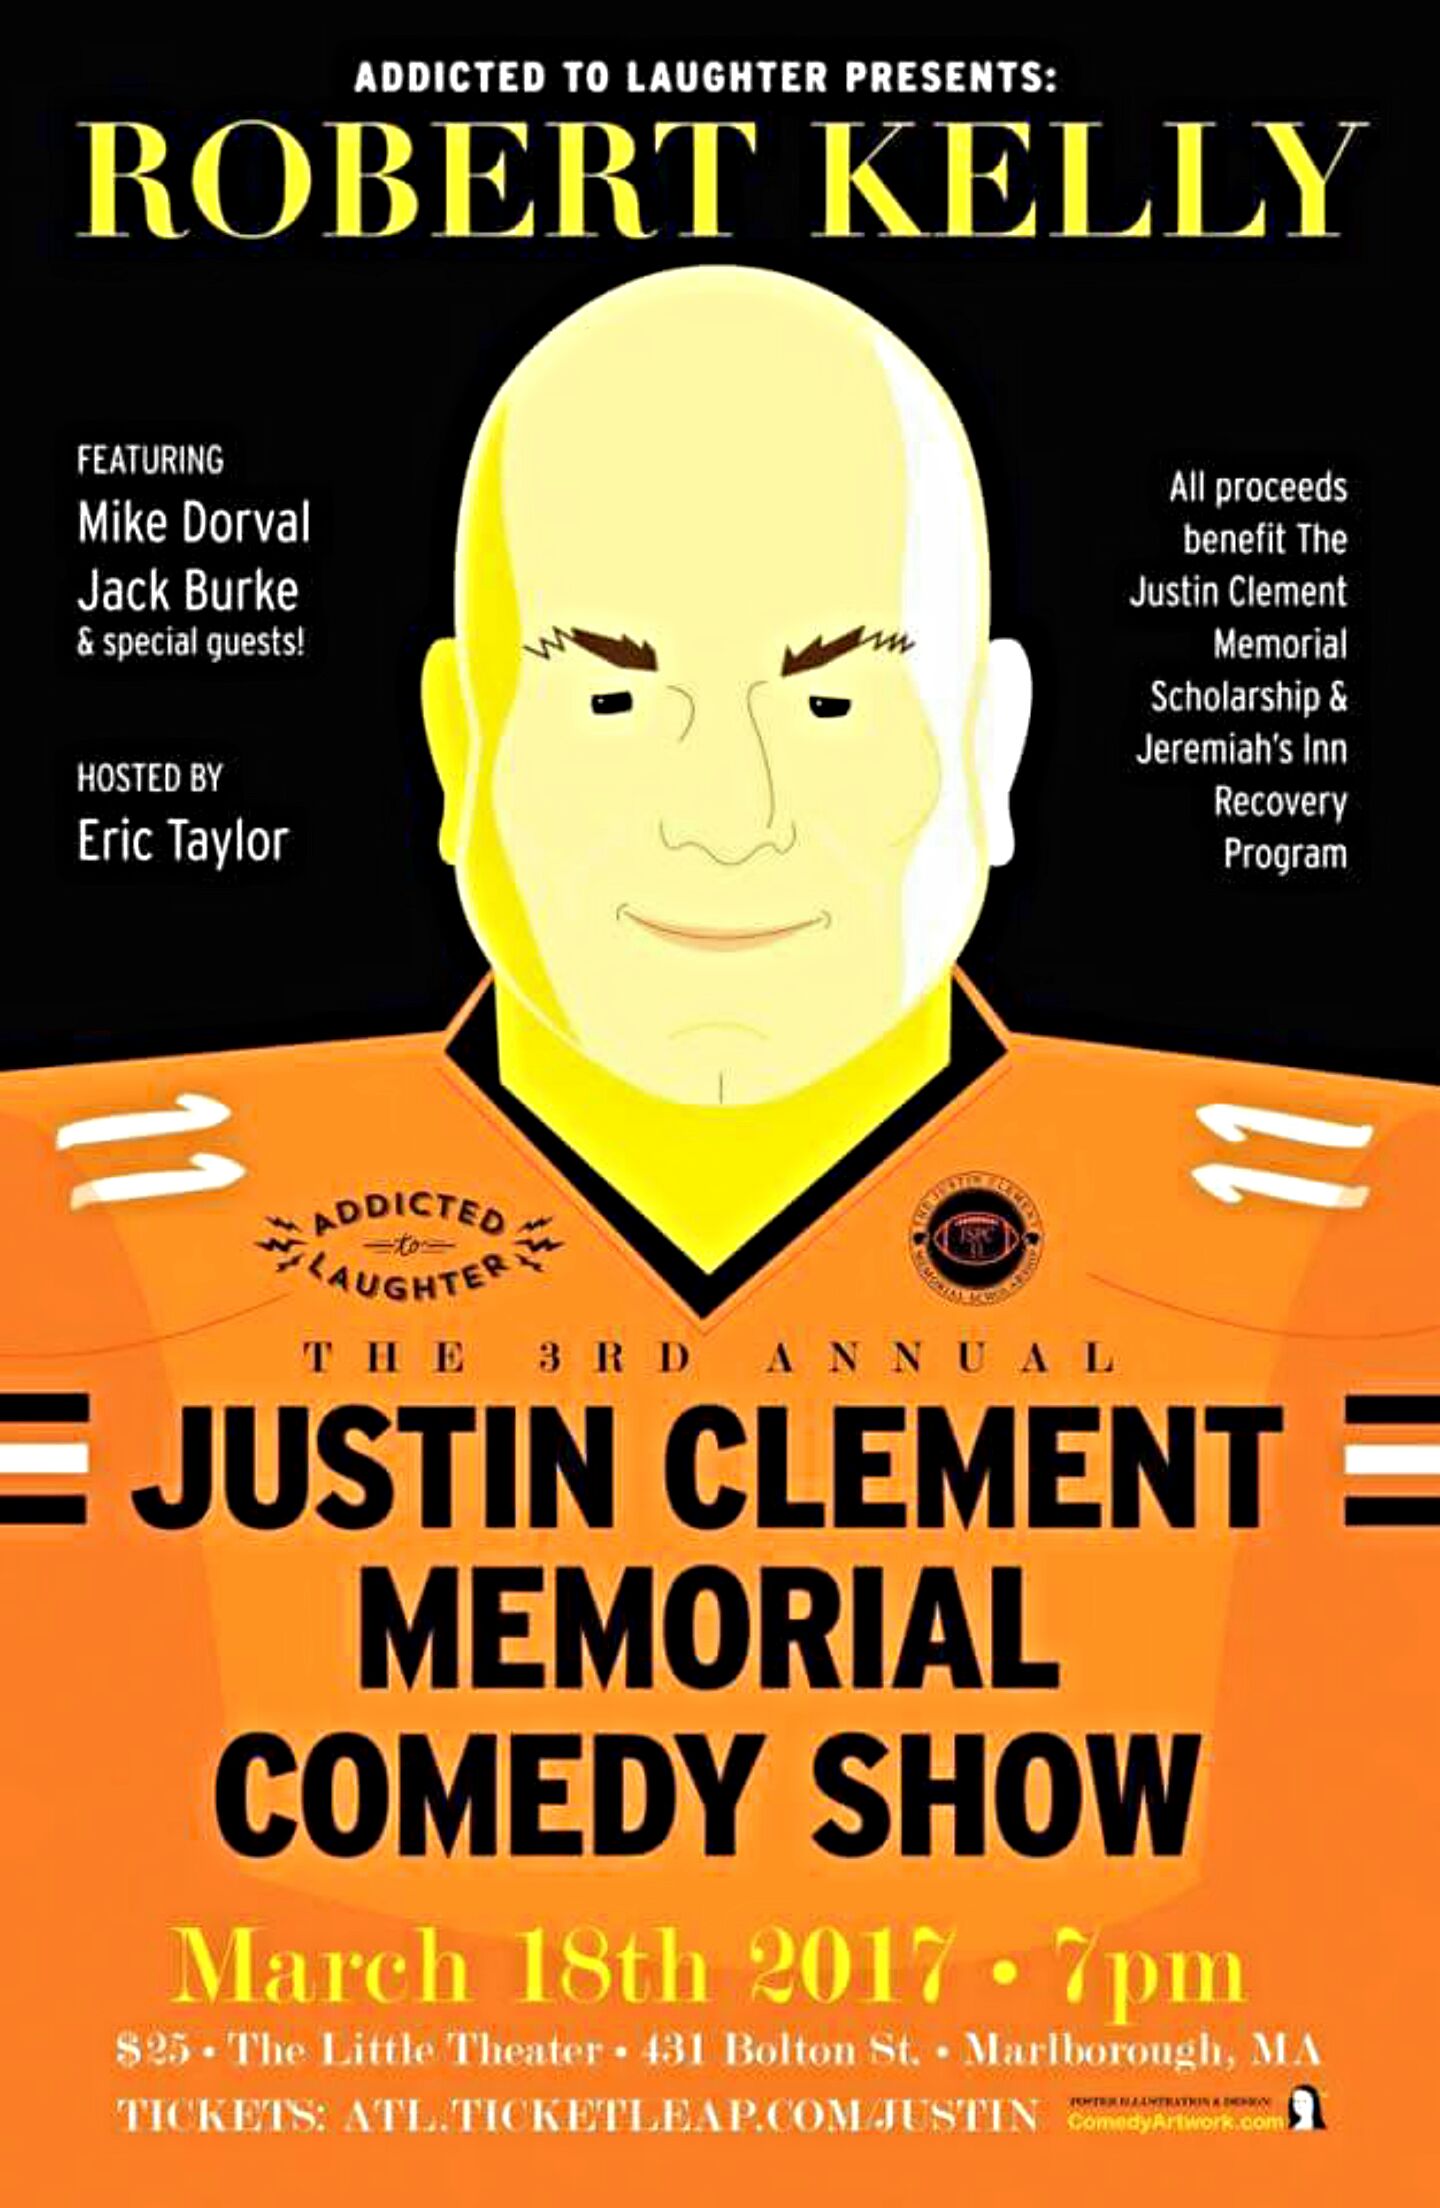 The Justin Clement Memorial Comedy Show